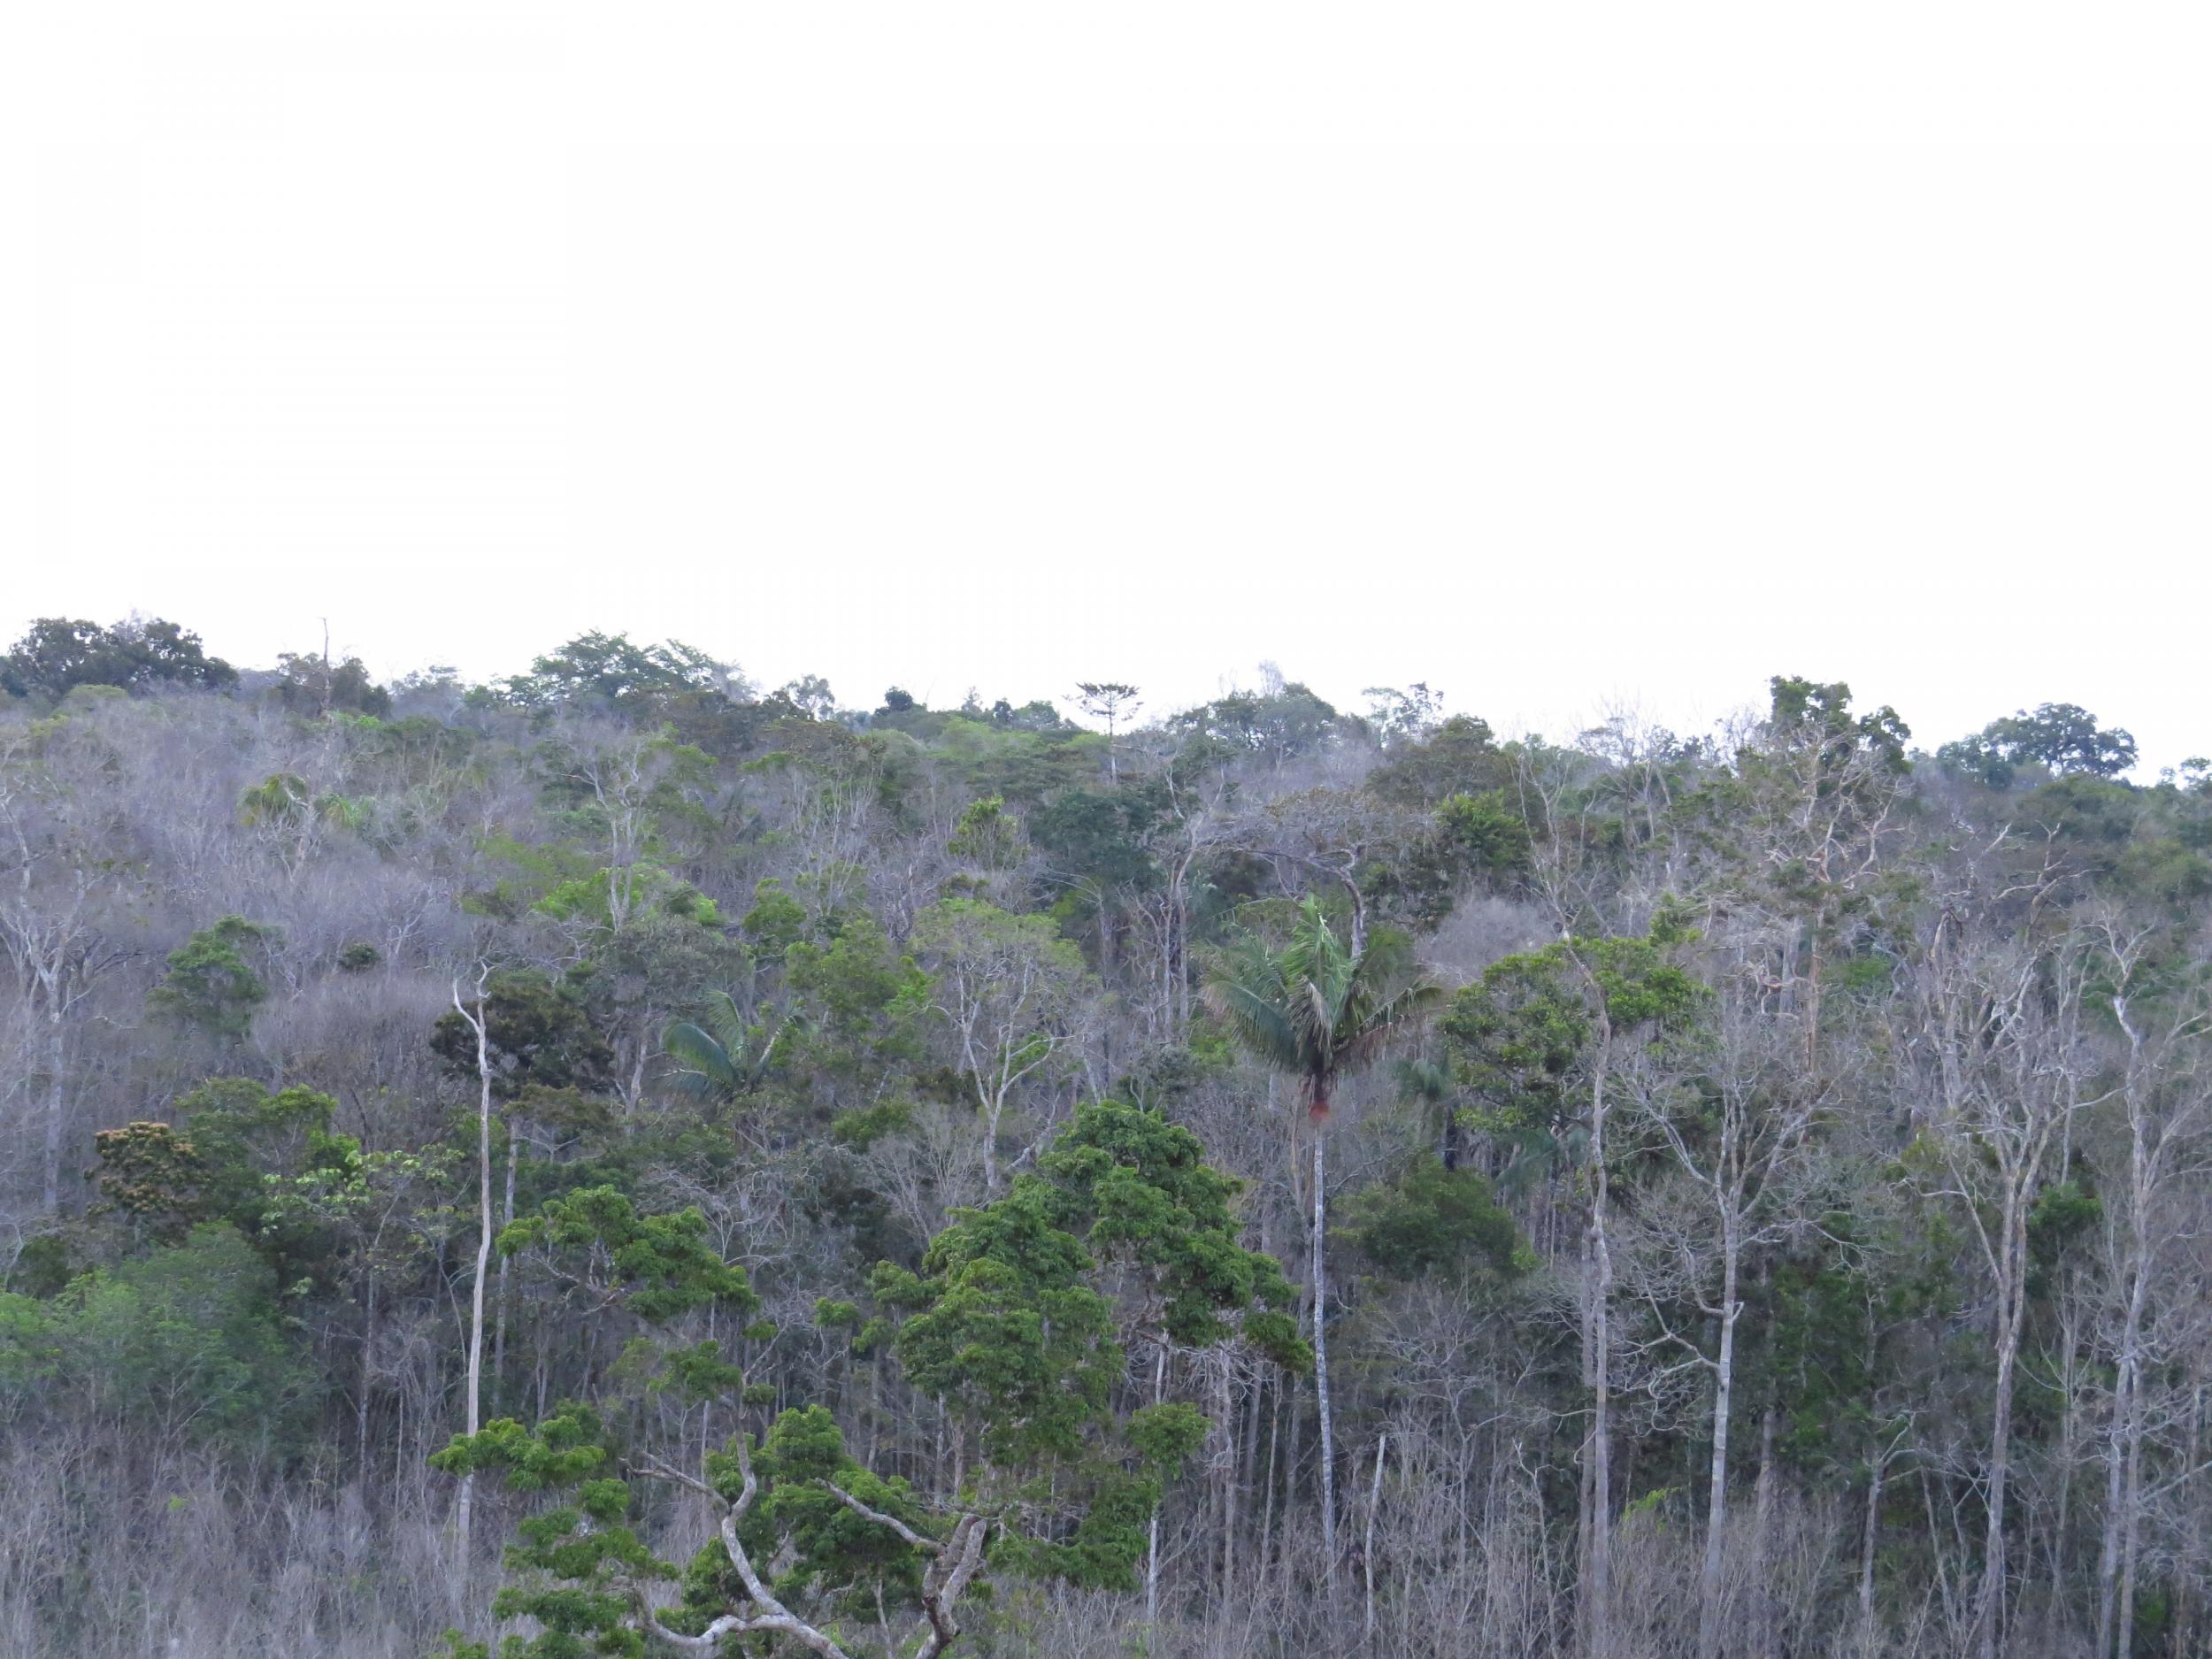 Dying region of forest in a region of central Amazon in Brazil from 2016